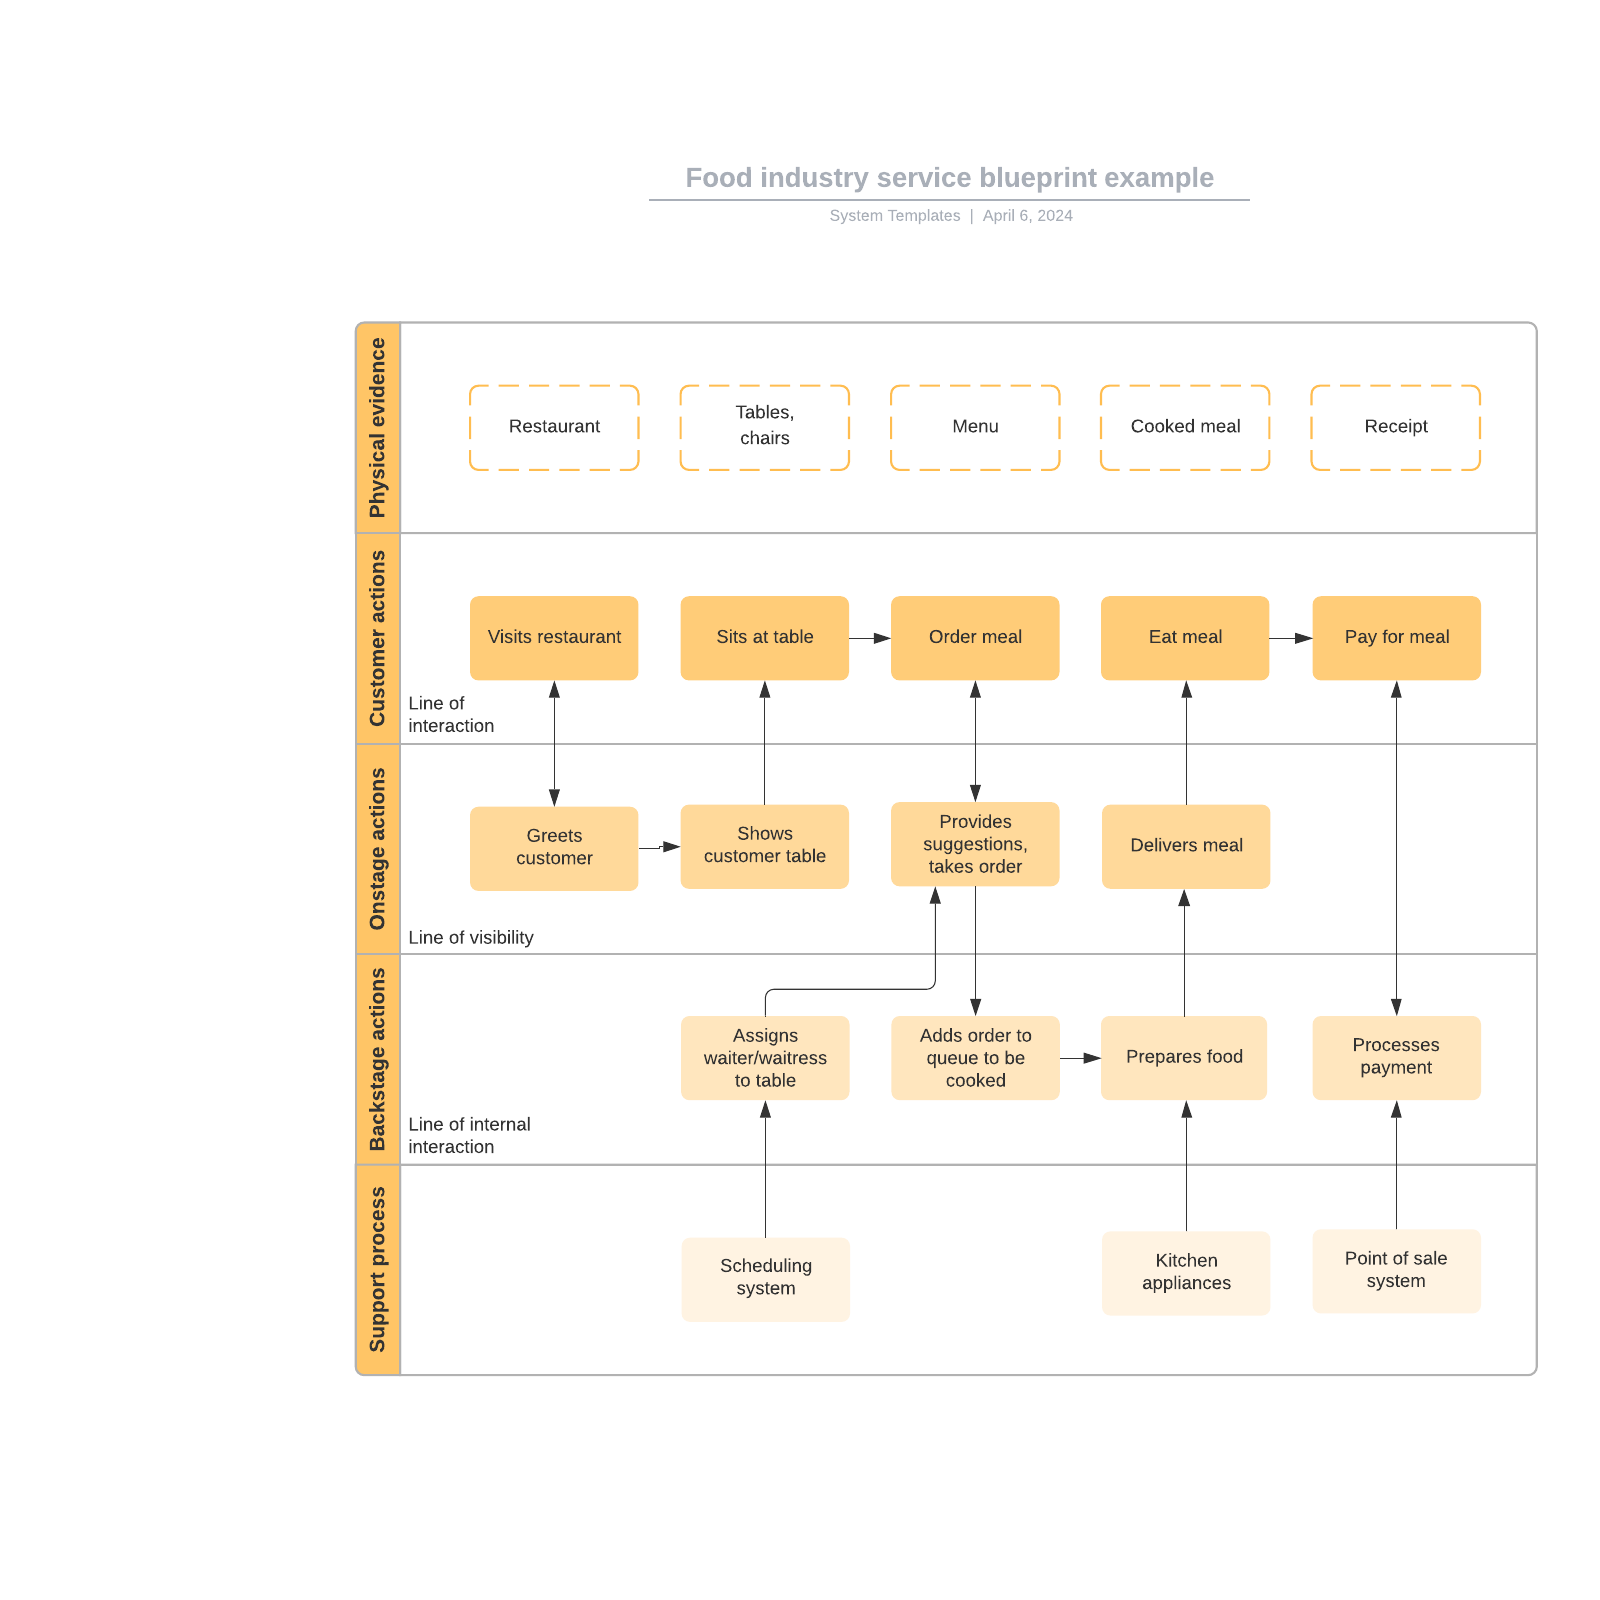 Food industry service blueprint example example